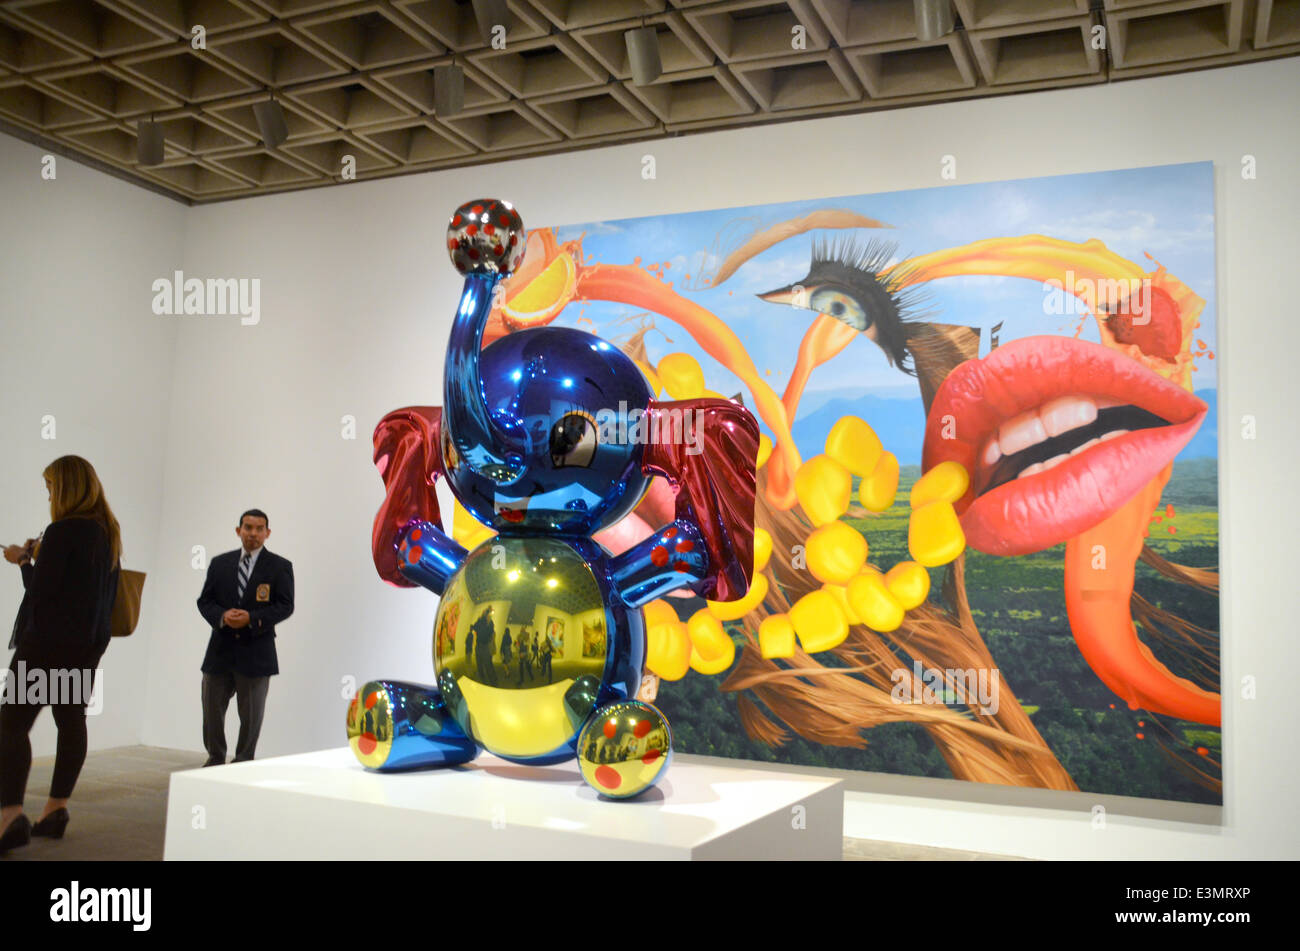 The sculpture 'Elephant' and the oil painting 'Lips' by US artist Jeff Koons  are on display at the Whitney museum in New York, USA, 24 June 2014. The  museum dedicates a large